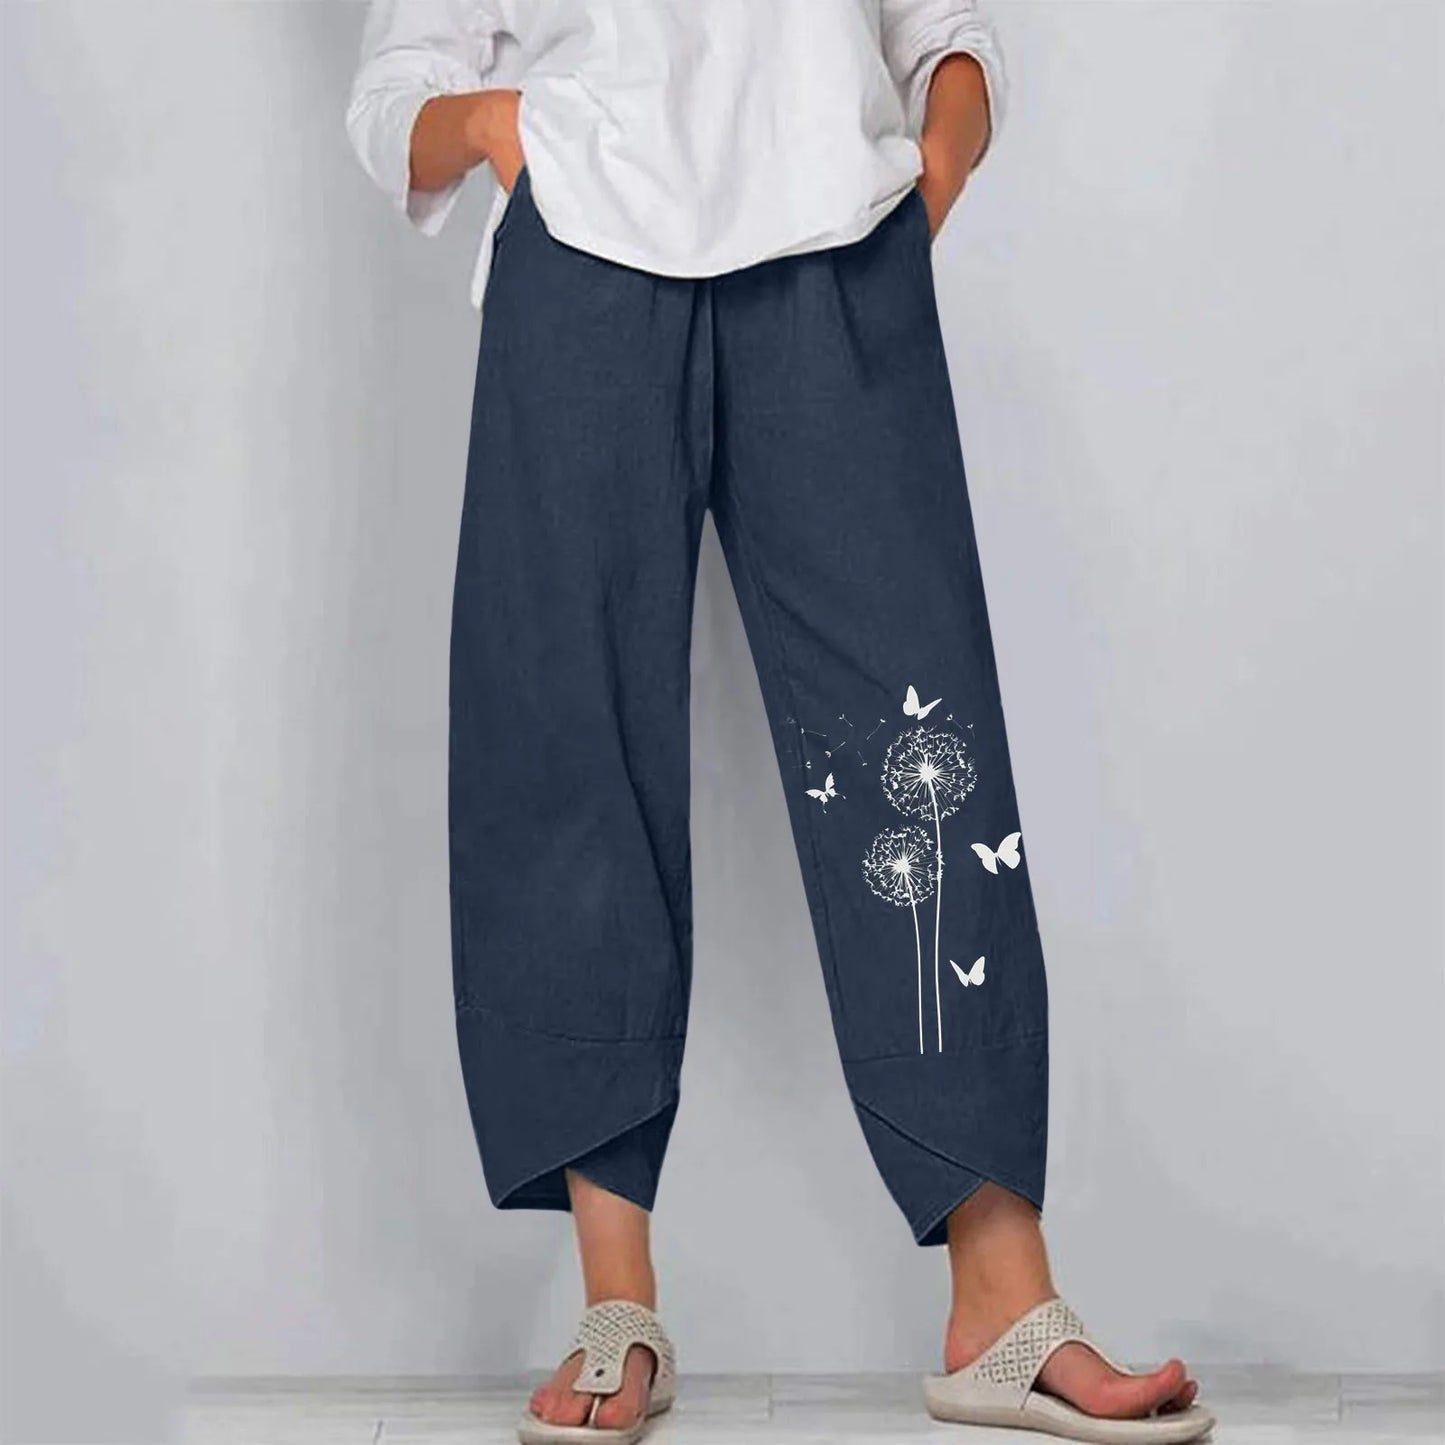 Capri Pants With Pockets and Wide Leg